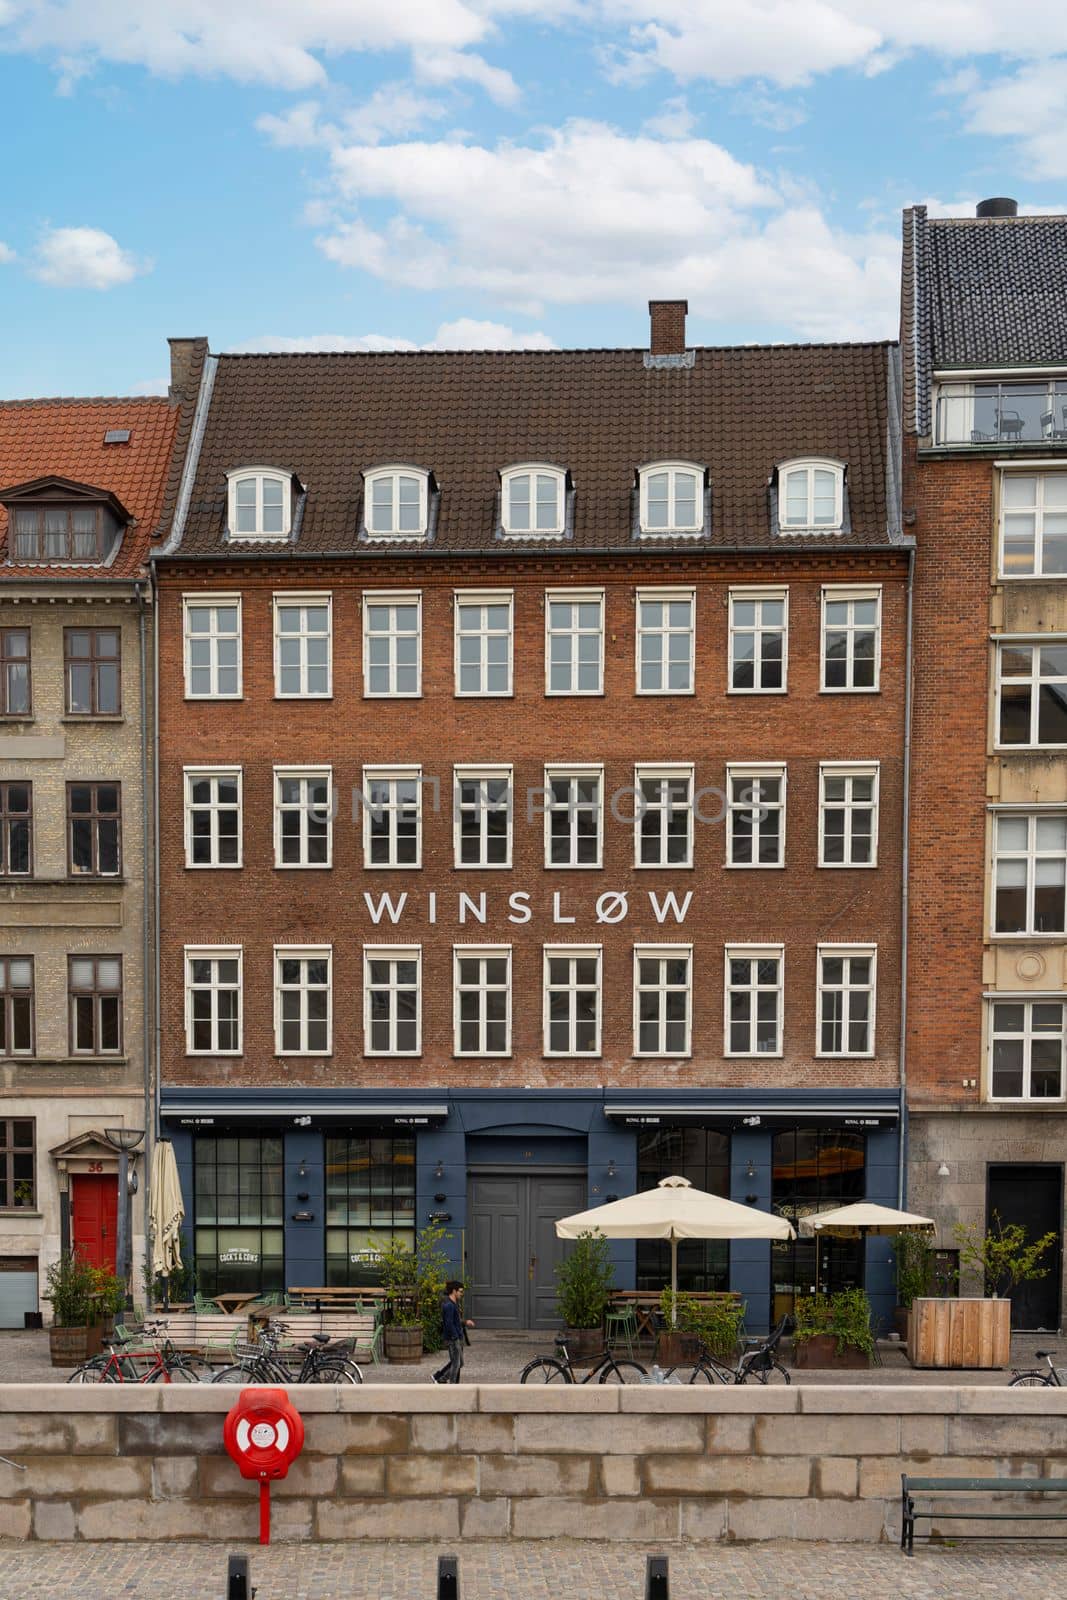 Copenhagen, Denmark. October 2022. A view of the typical house facades on the streets in the city center